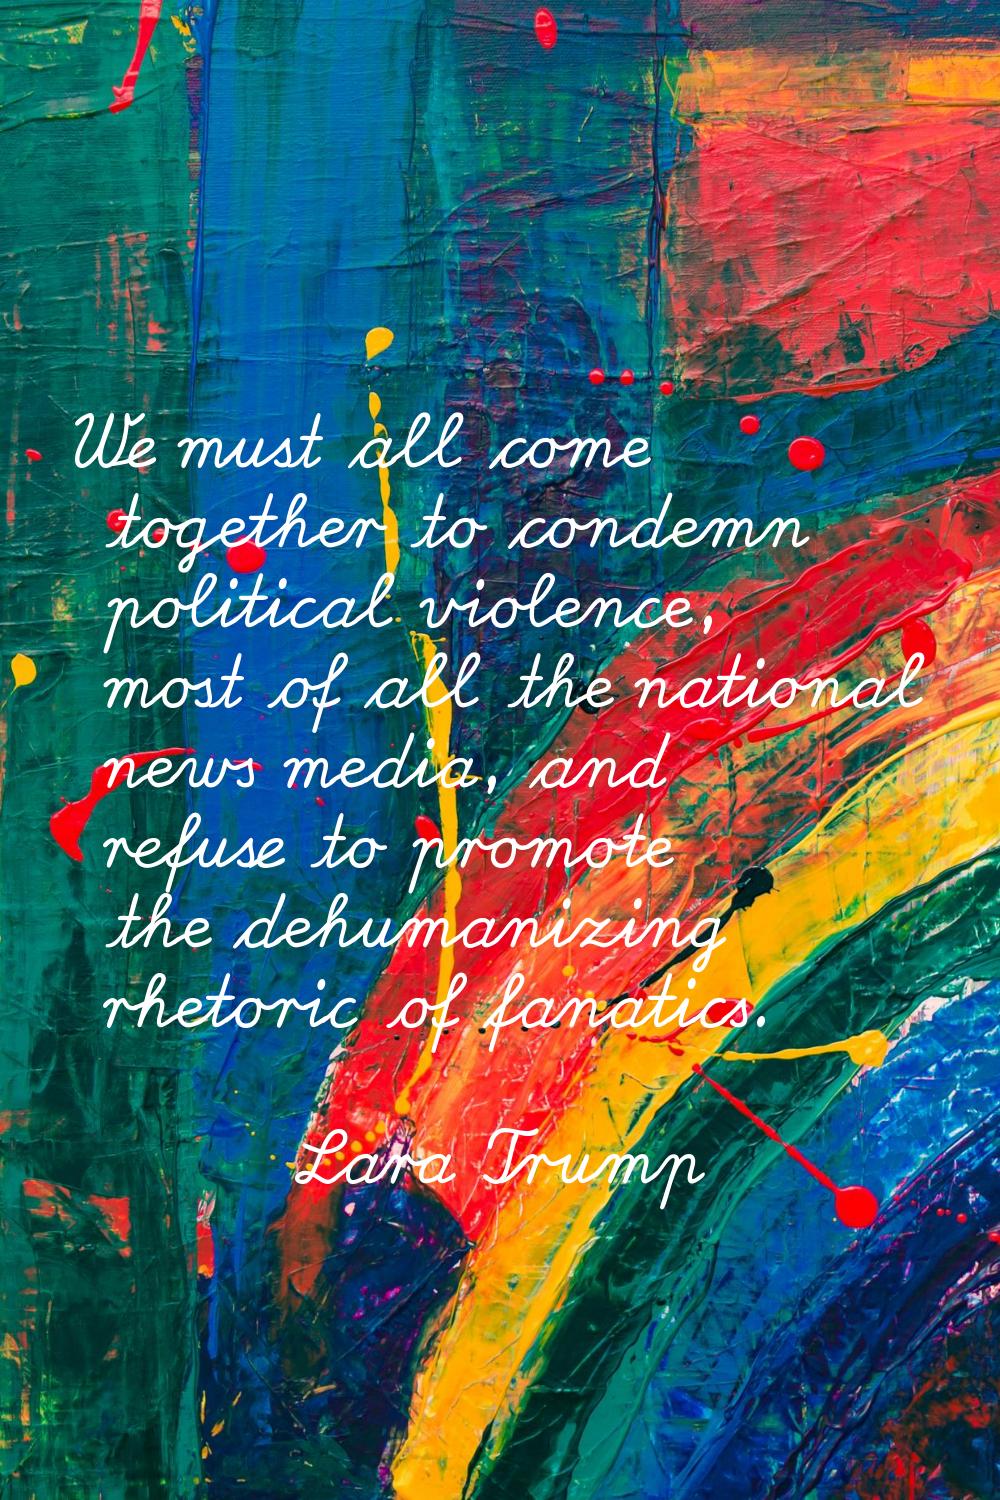 We must all come together to condemn political violence, most of all the national news media, and r